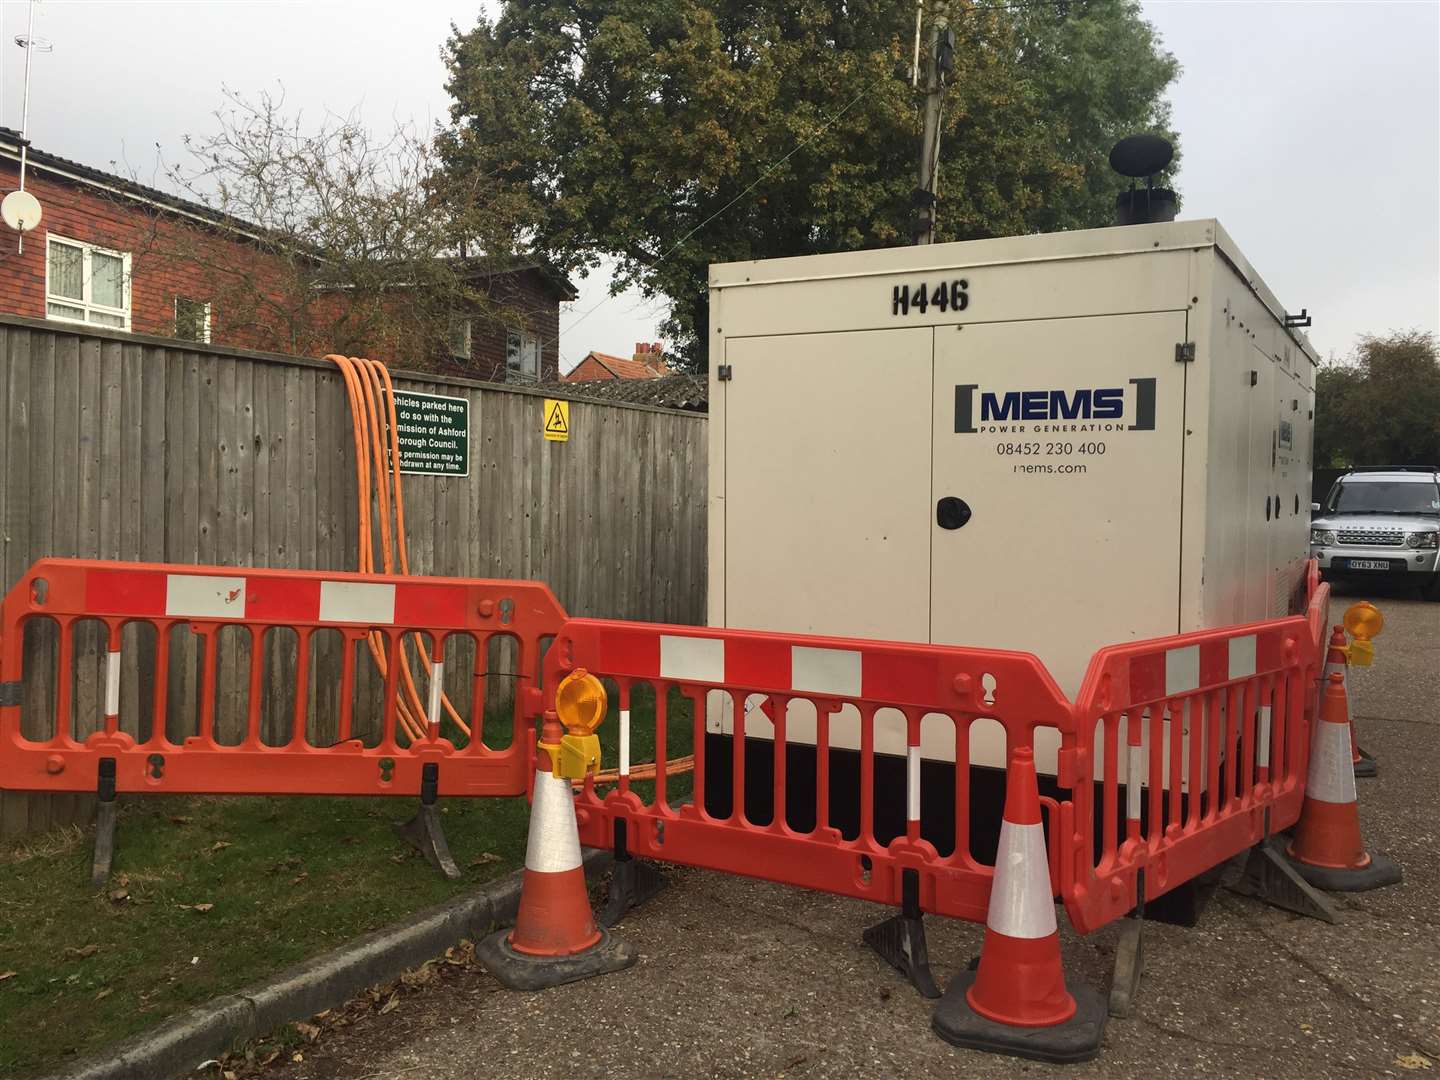 One of the generators which was behind the Faversham Road shops in the car park